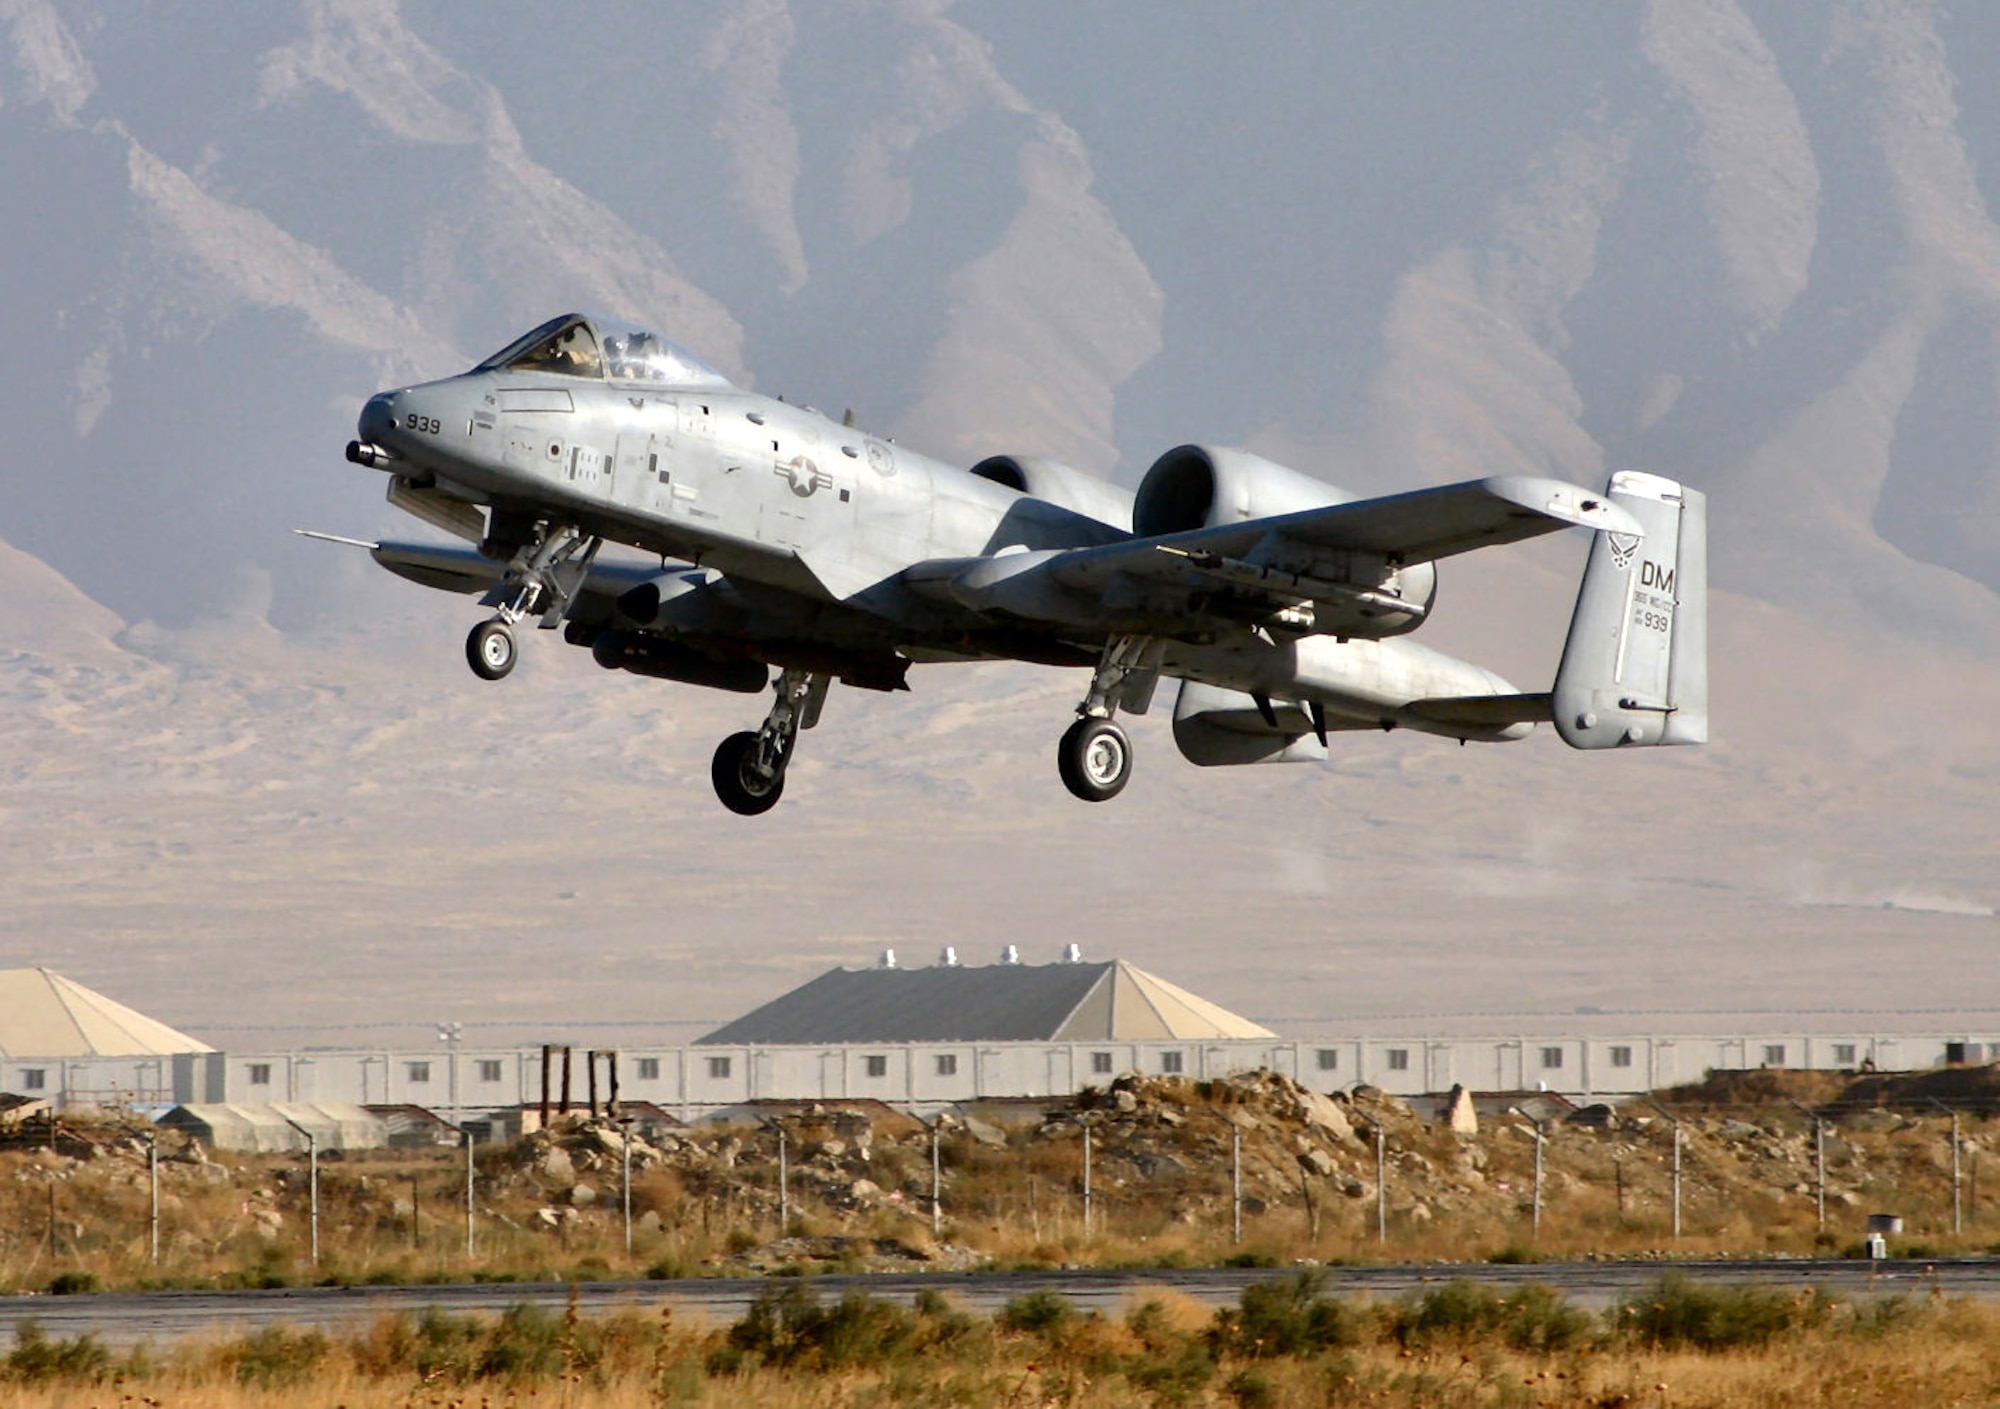 BAGRAM AIR BASE, Afghanistan -- An A-10 Thunderbolt II takes off on a combat mission. Since Sept. 15, A-10s here have flown more than 1,700 sorties in support of Operation Enduring Freedom. The A-10 was the first Air Force aircraft specially designed for close air support of ground forces. (U.S. Air Force photo by Chief Master Sgt. David L. Stuppy)